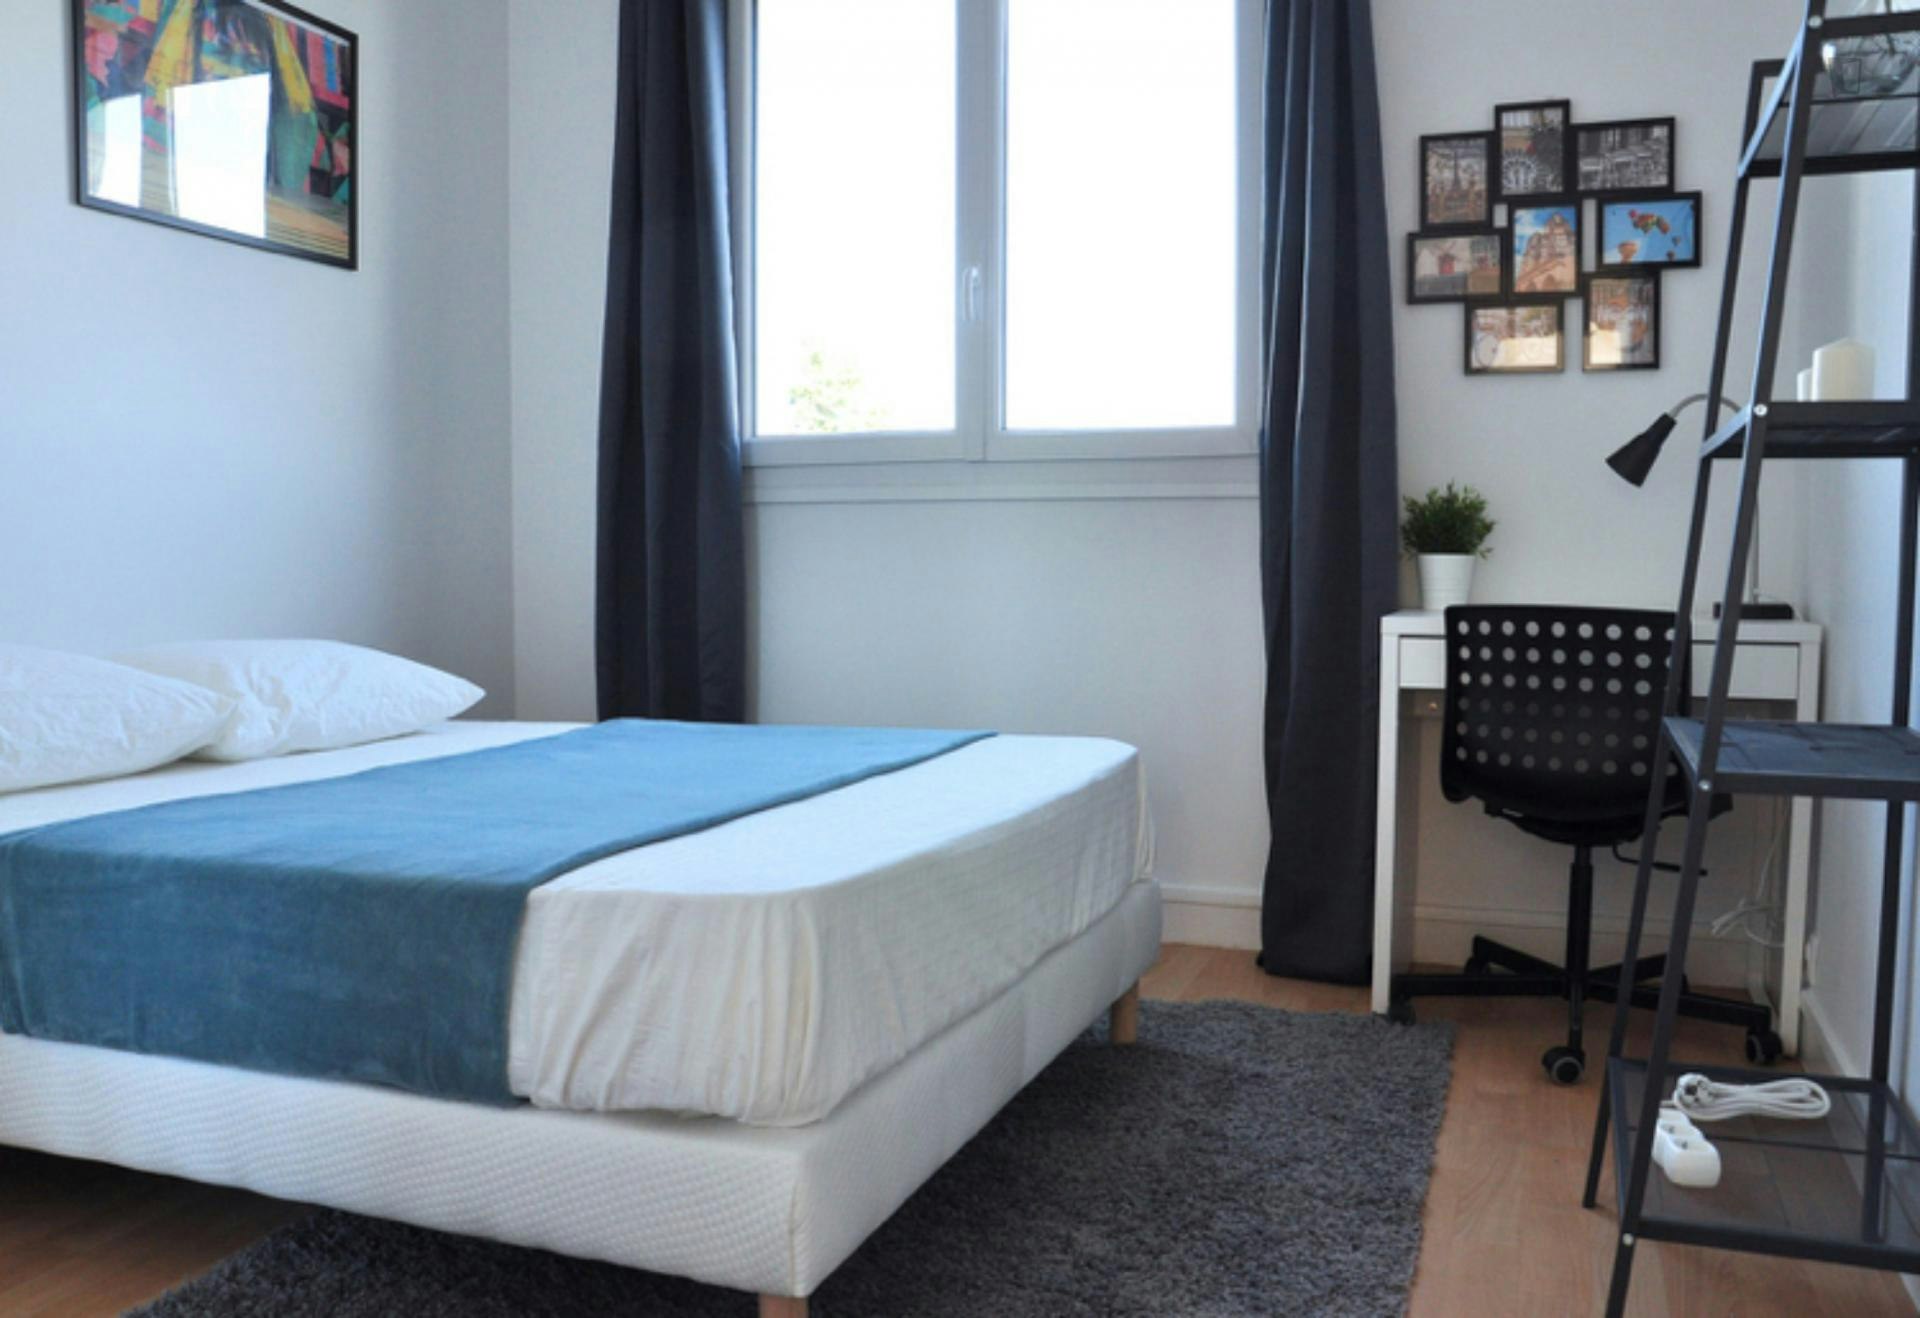 Nice quiet and bright bedroom - 13m² - NT3